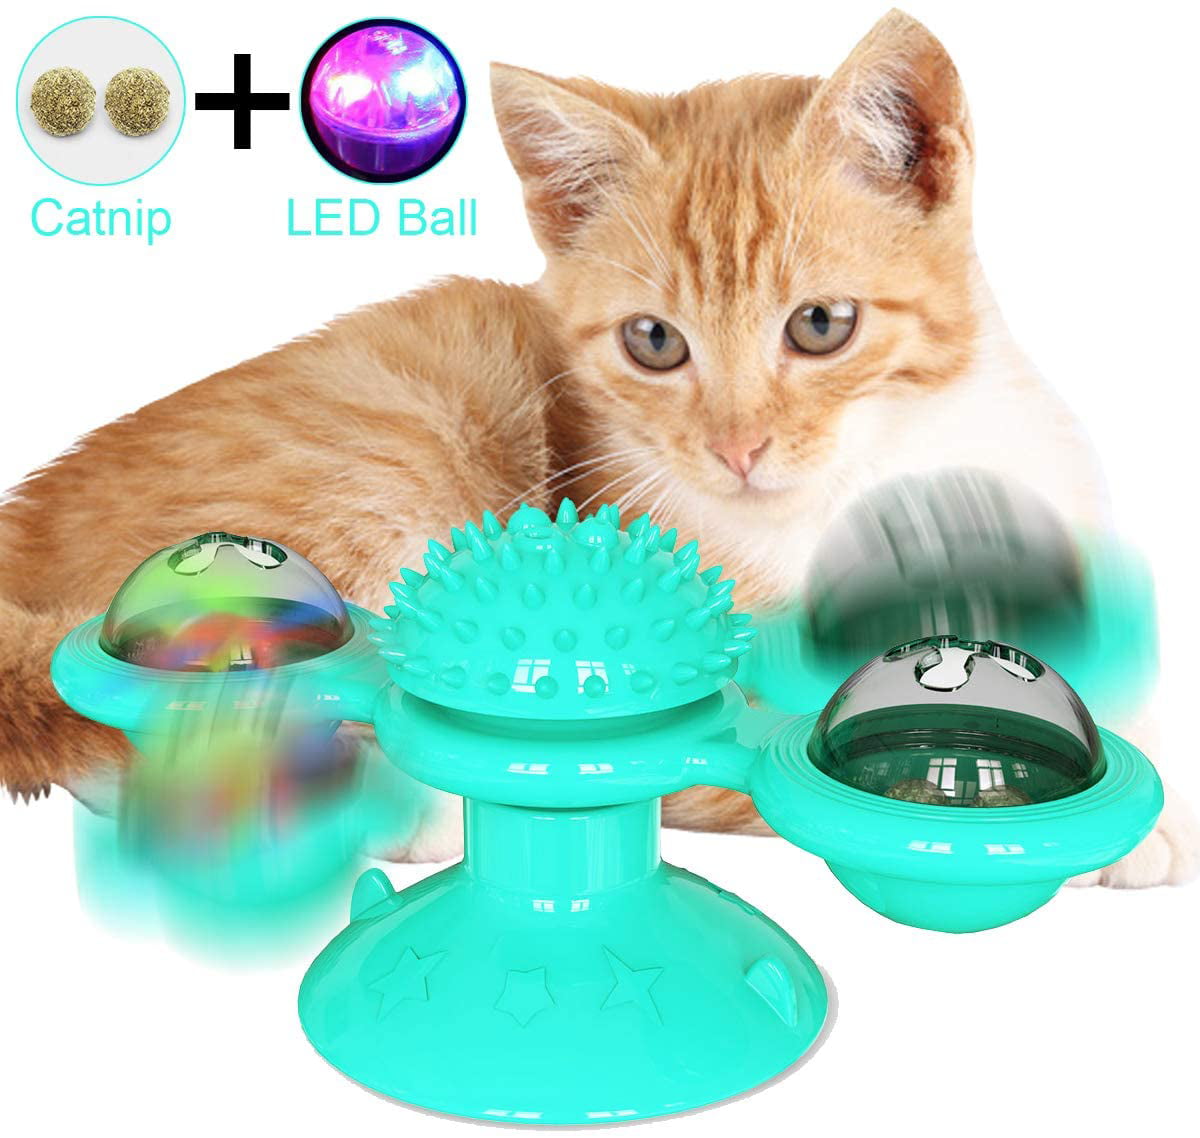 YUTANG Interactive Windmill Cat Toys with Catnip Cat Toys for Indoor Cats Funny Kitten Toys with LED Light Ball Suction Cup‖Cat Nip Toy for Cat chew Exercise